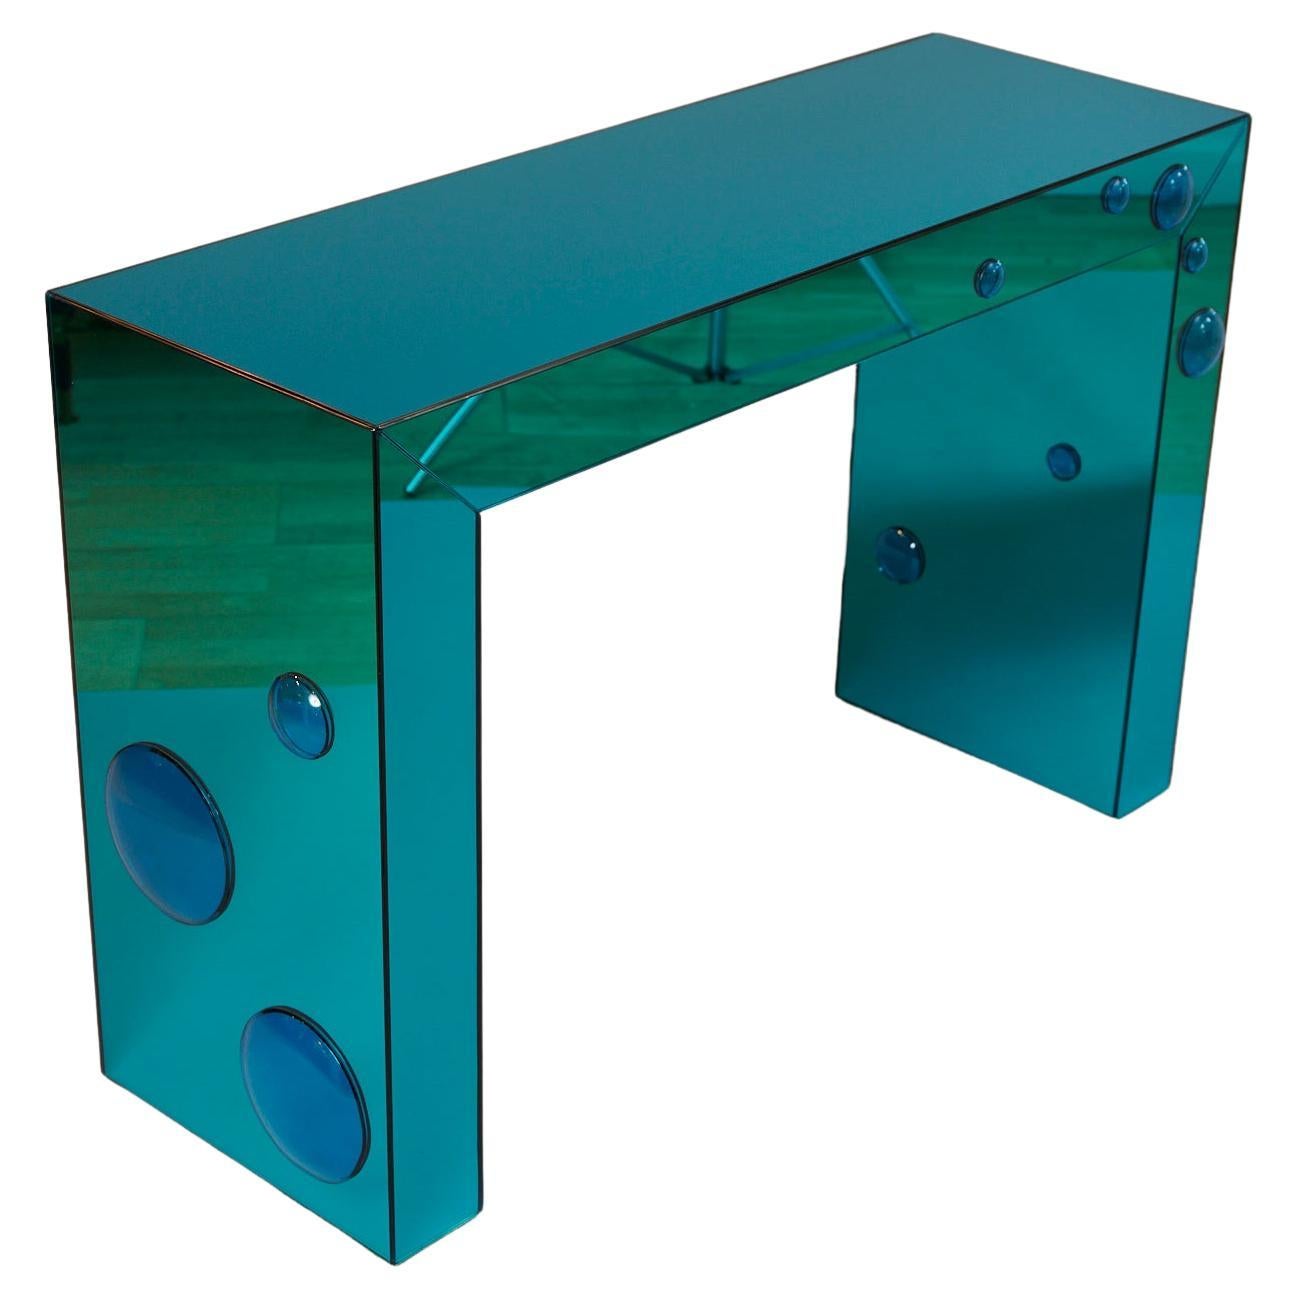 Mirrored 'Seagreen' console table with blue glass bubble spots For Sale